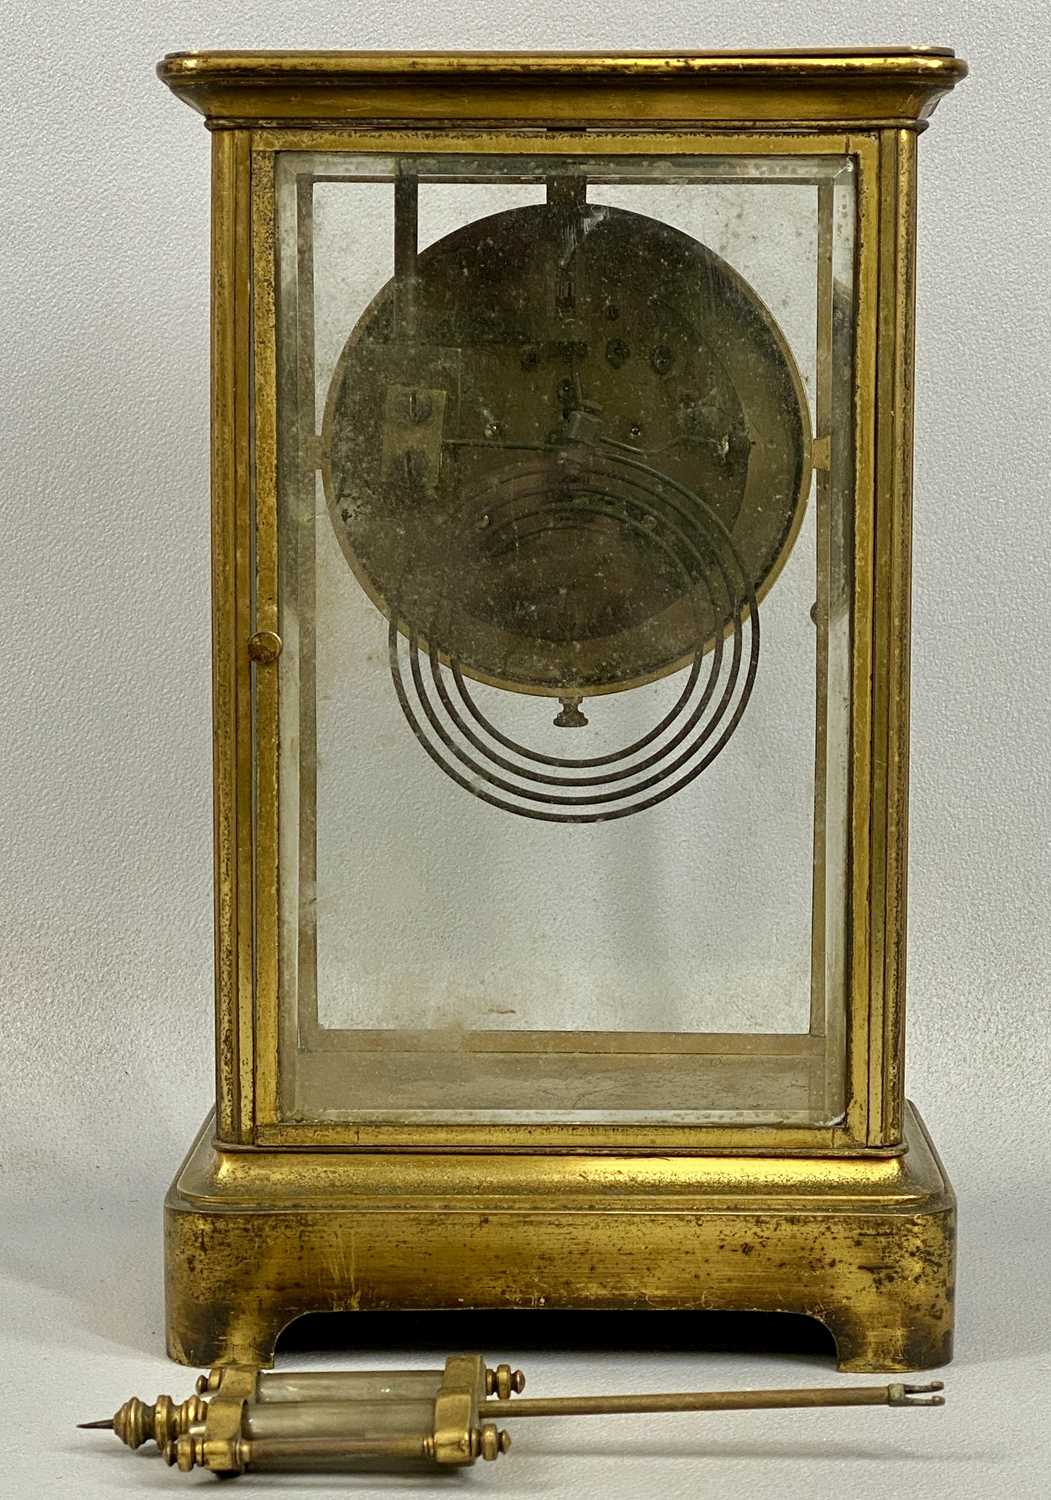 JAPY FRERES 19TH CENTURY GILDED BRASS CASED MANTEL CLOCK, with mercury pendulum, circular dial - Image 2 of 3